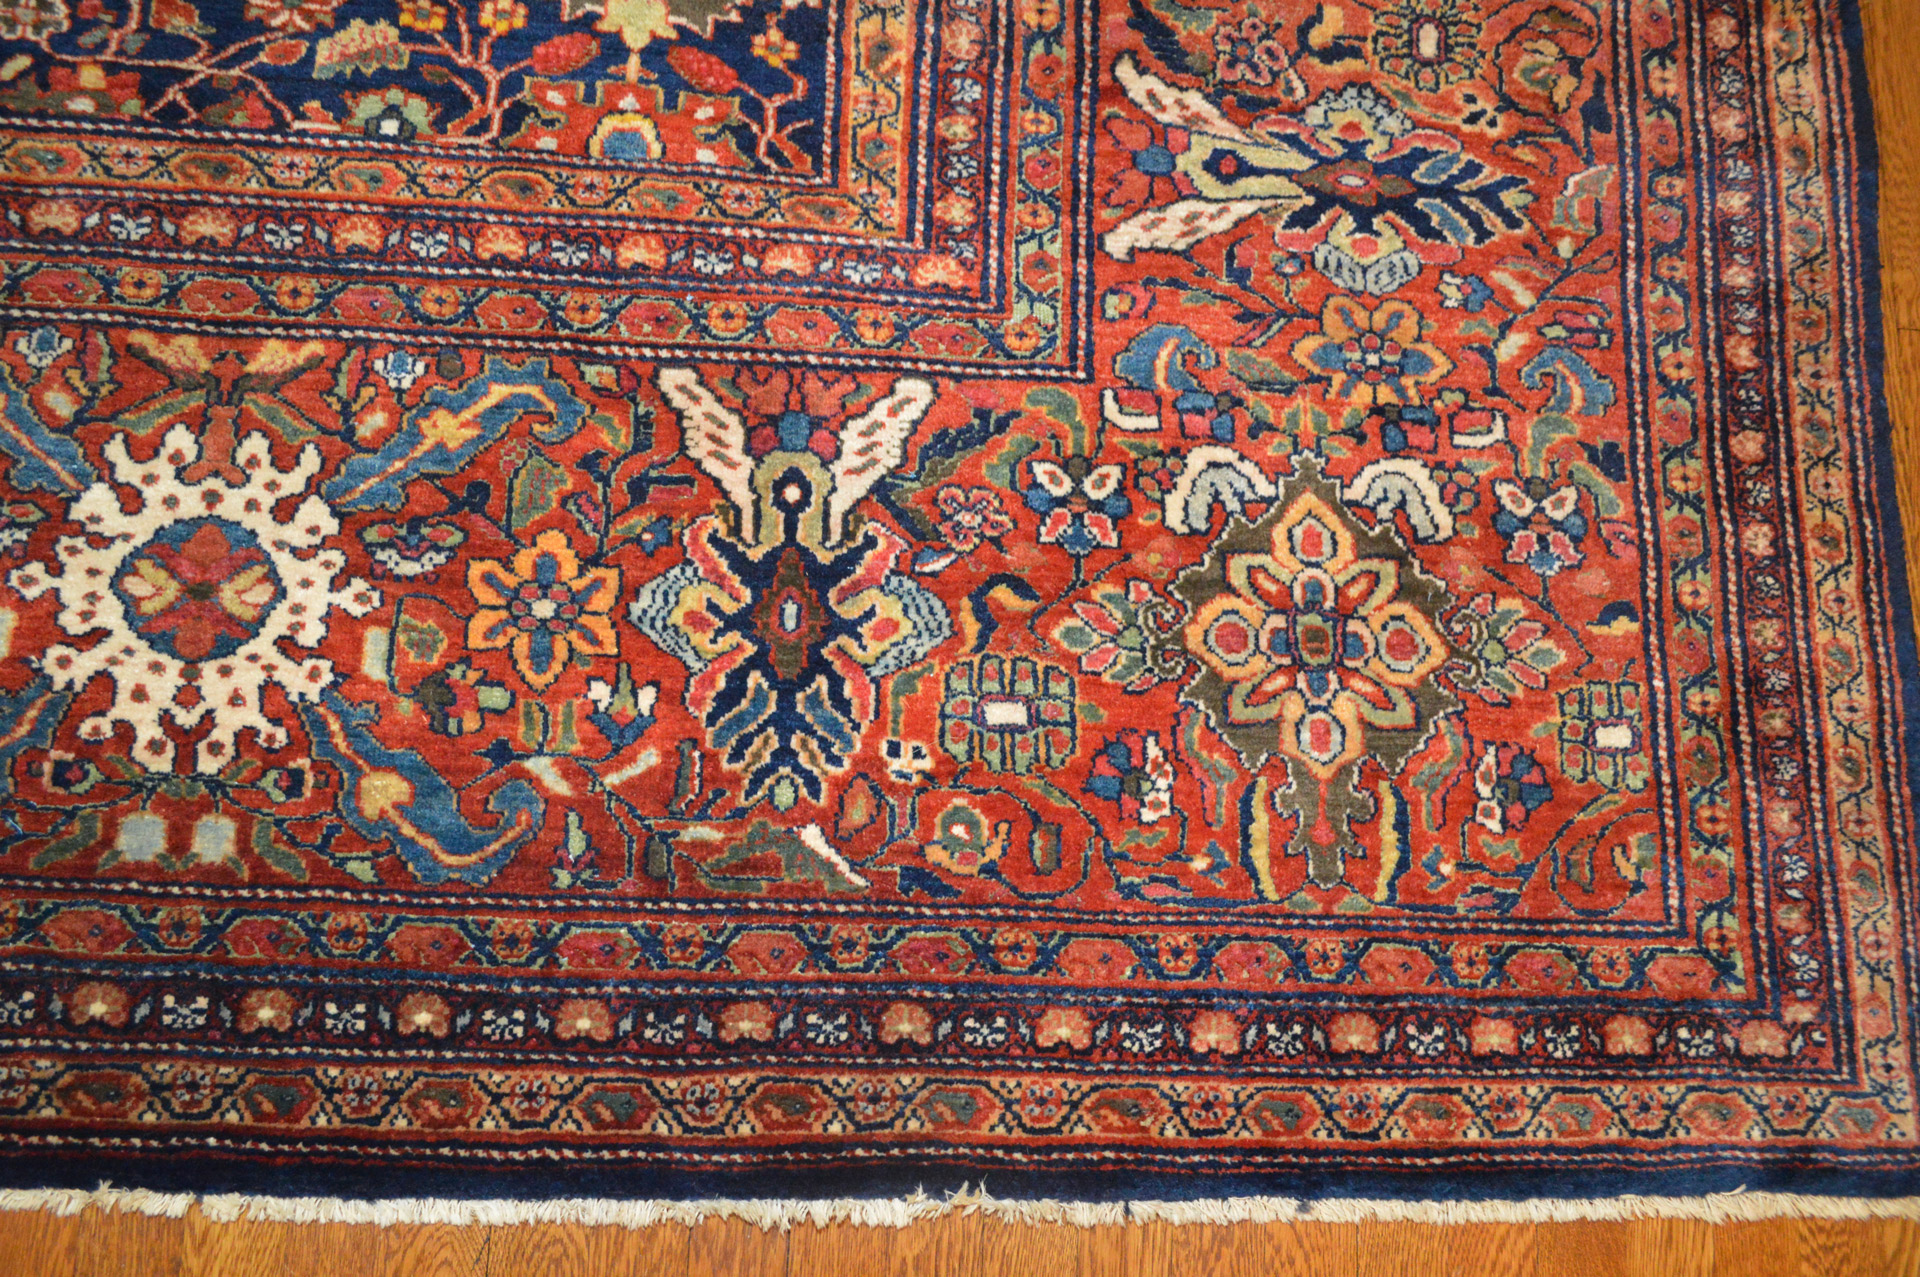 A large antique Fereghan Sarouk carpet, central Persia, with a navy blue field decorated with an all-over design and framed by a wide, red border. Douglas Stock Gallery, antique rugs, Boston,MA area